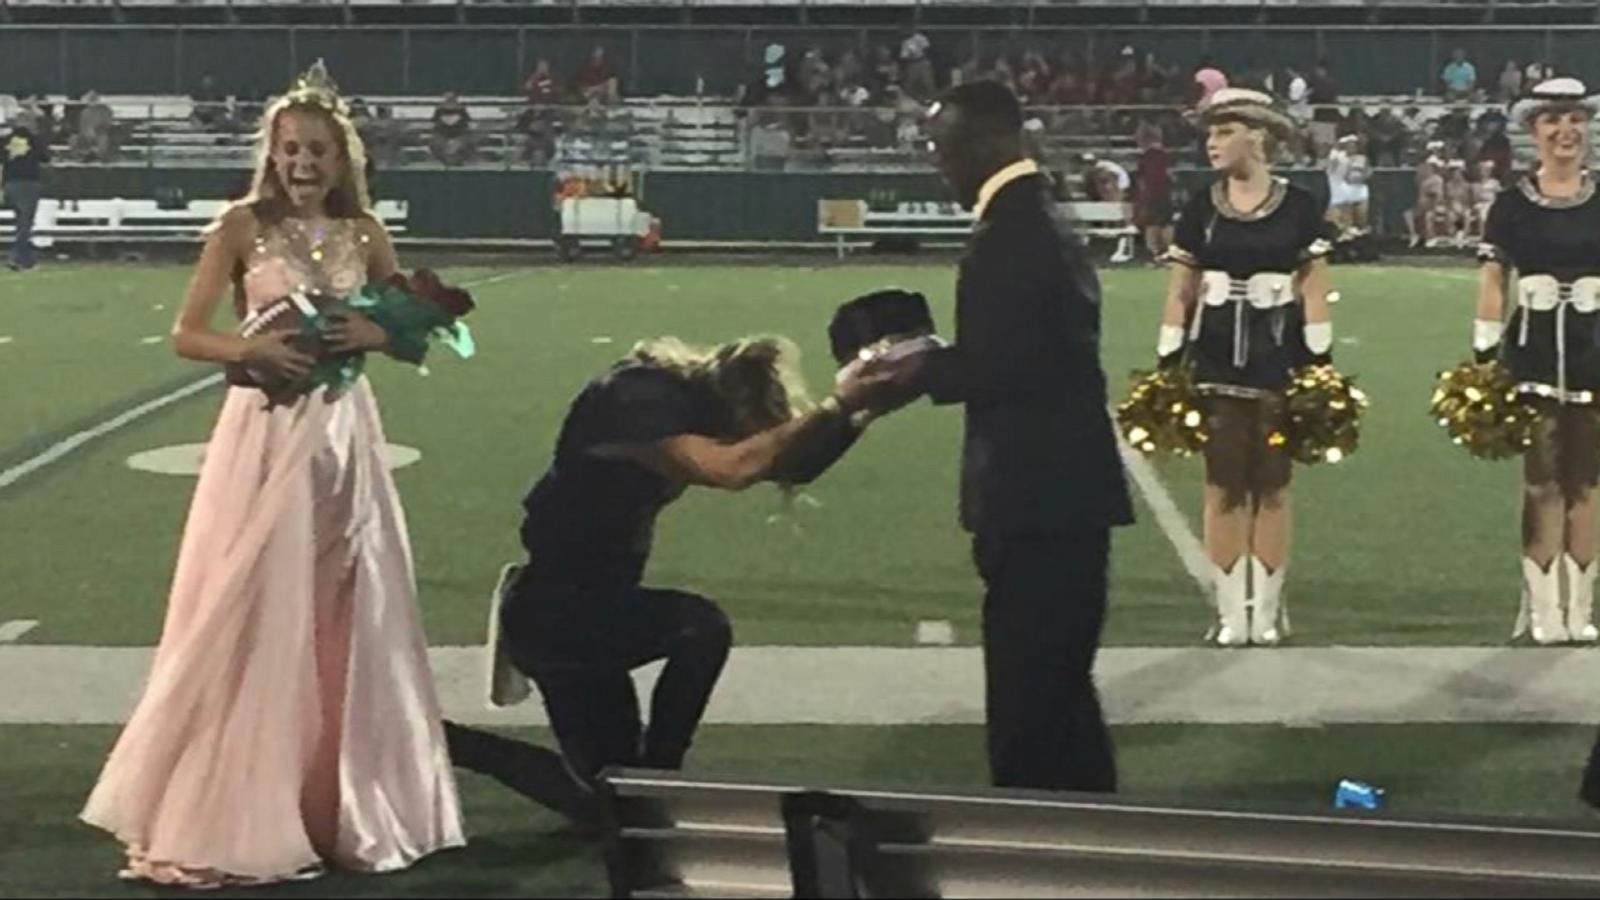 Homecoming Hero Gives Homecoming Crown to Friend With Cerebral Palsy